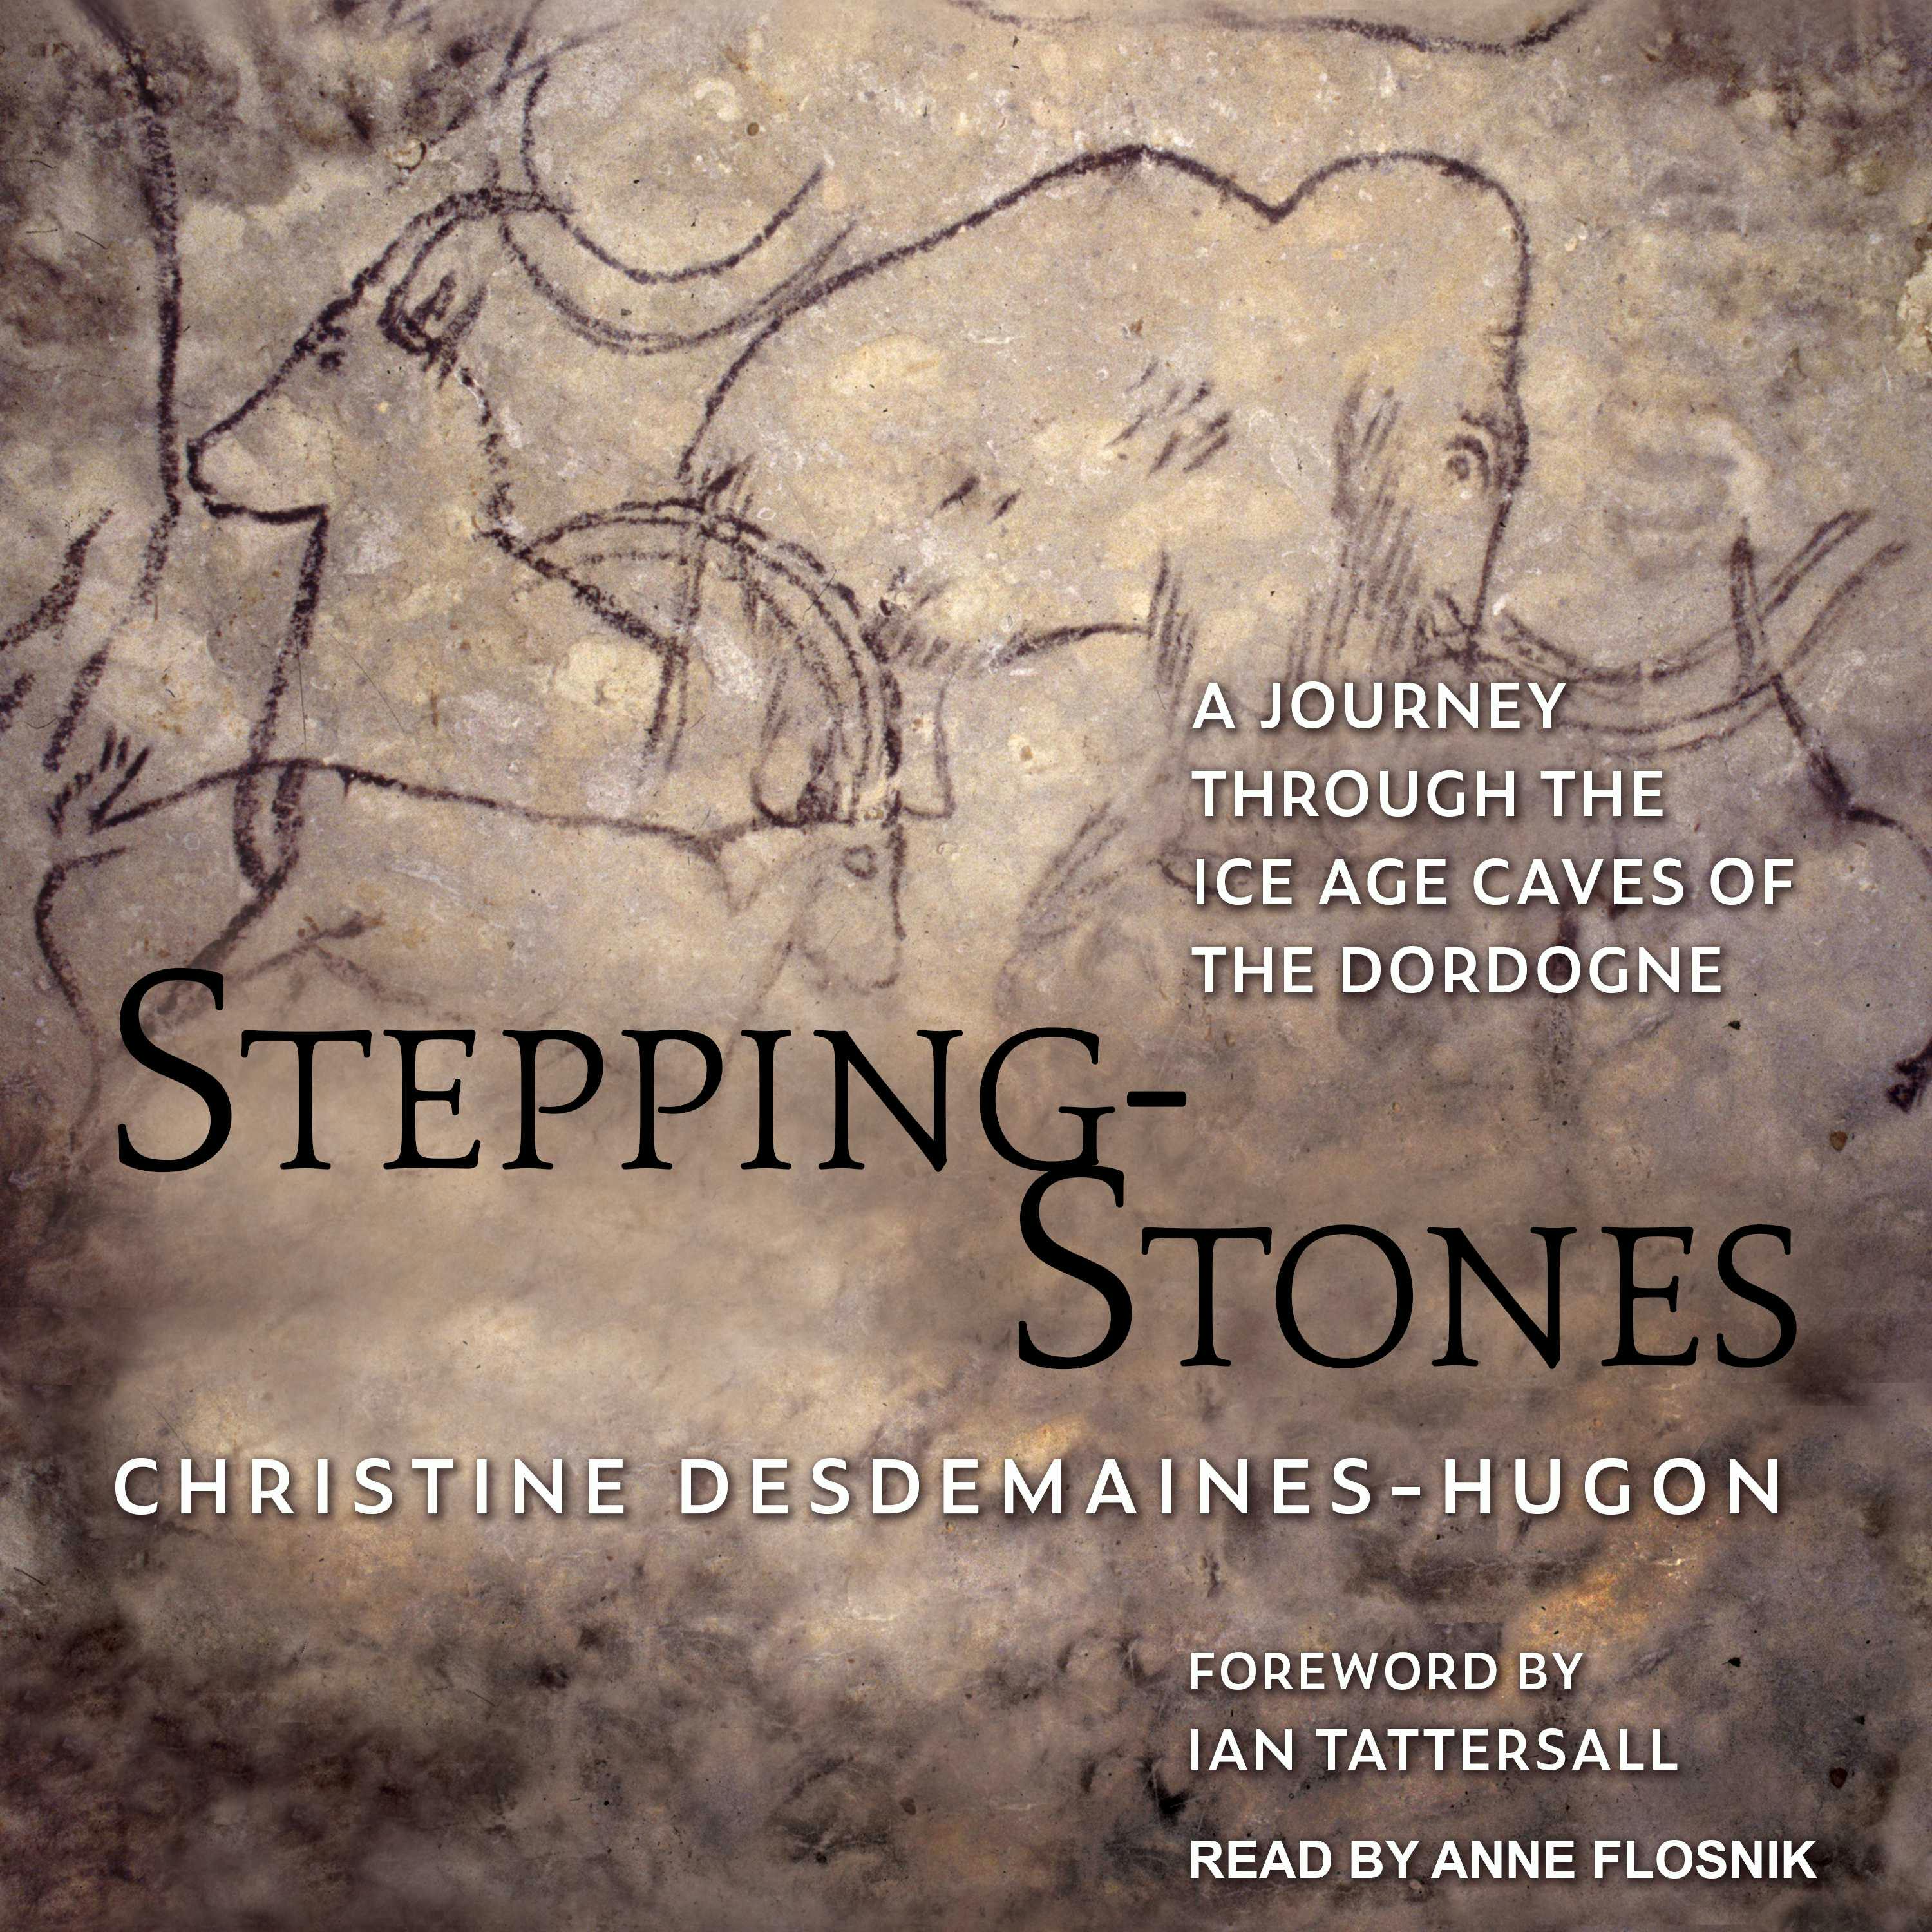 Stepping-Stones: A Journey Through The Ice Age Caves Of The Dordogne - undefined